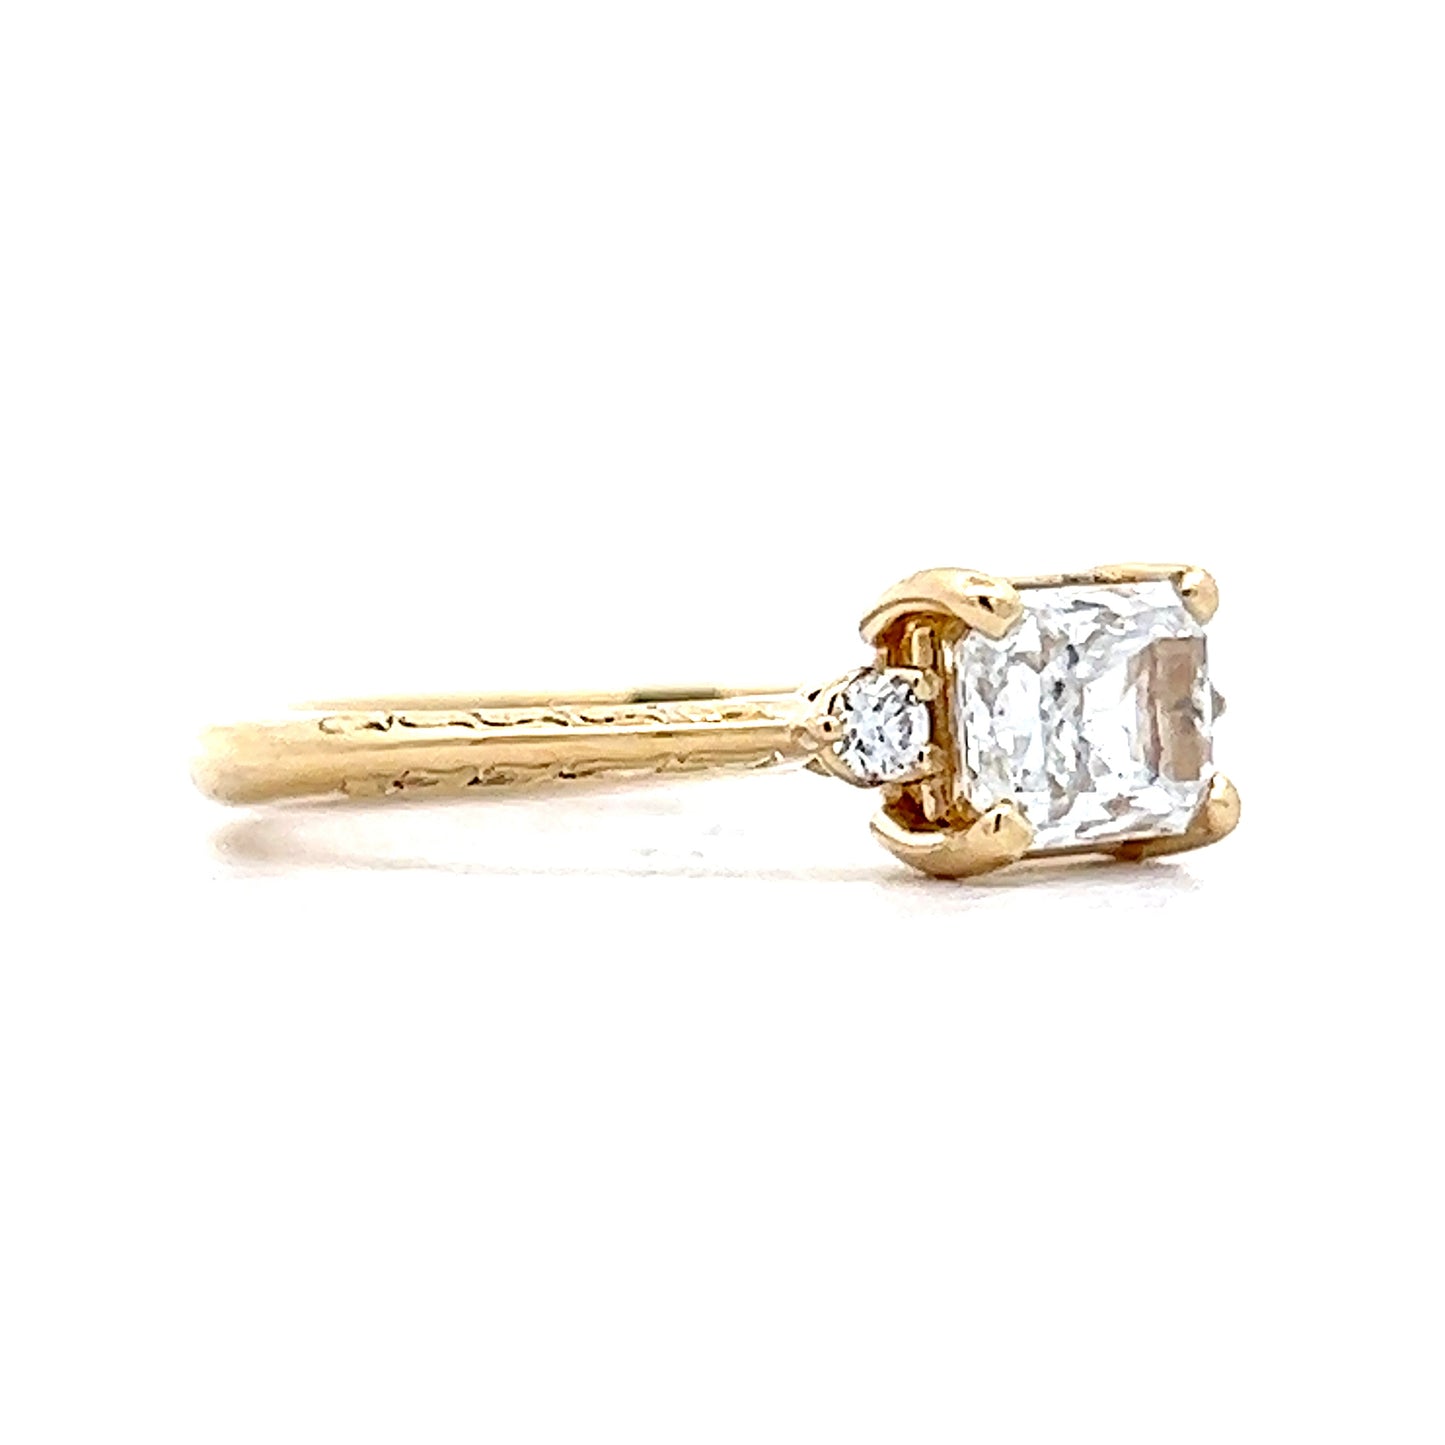 1.01 Radiant Cut Diamond Engagement Ring in 14k Yellow Gold